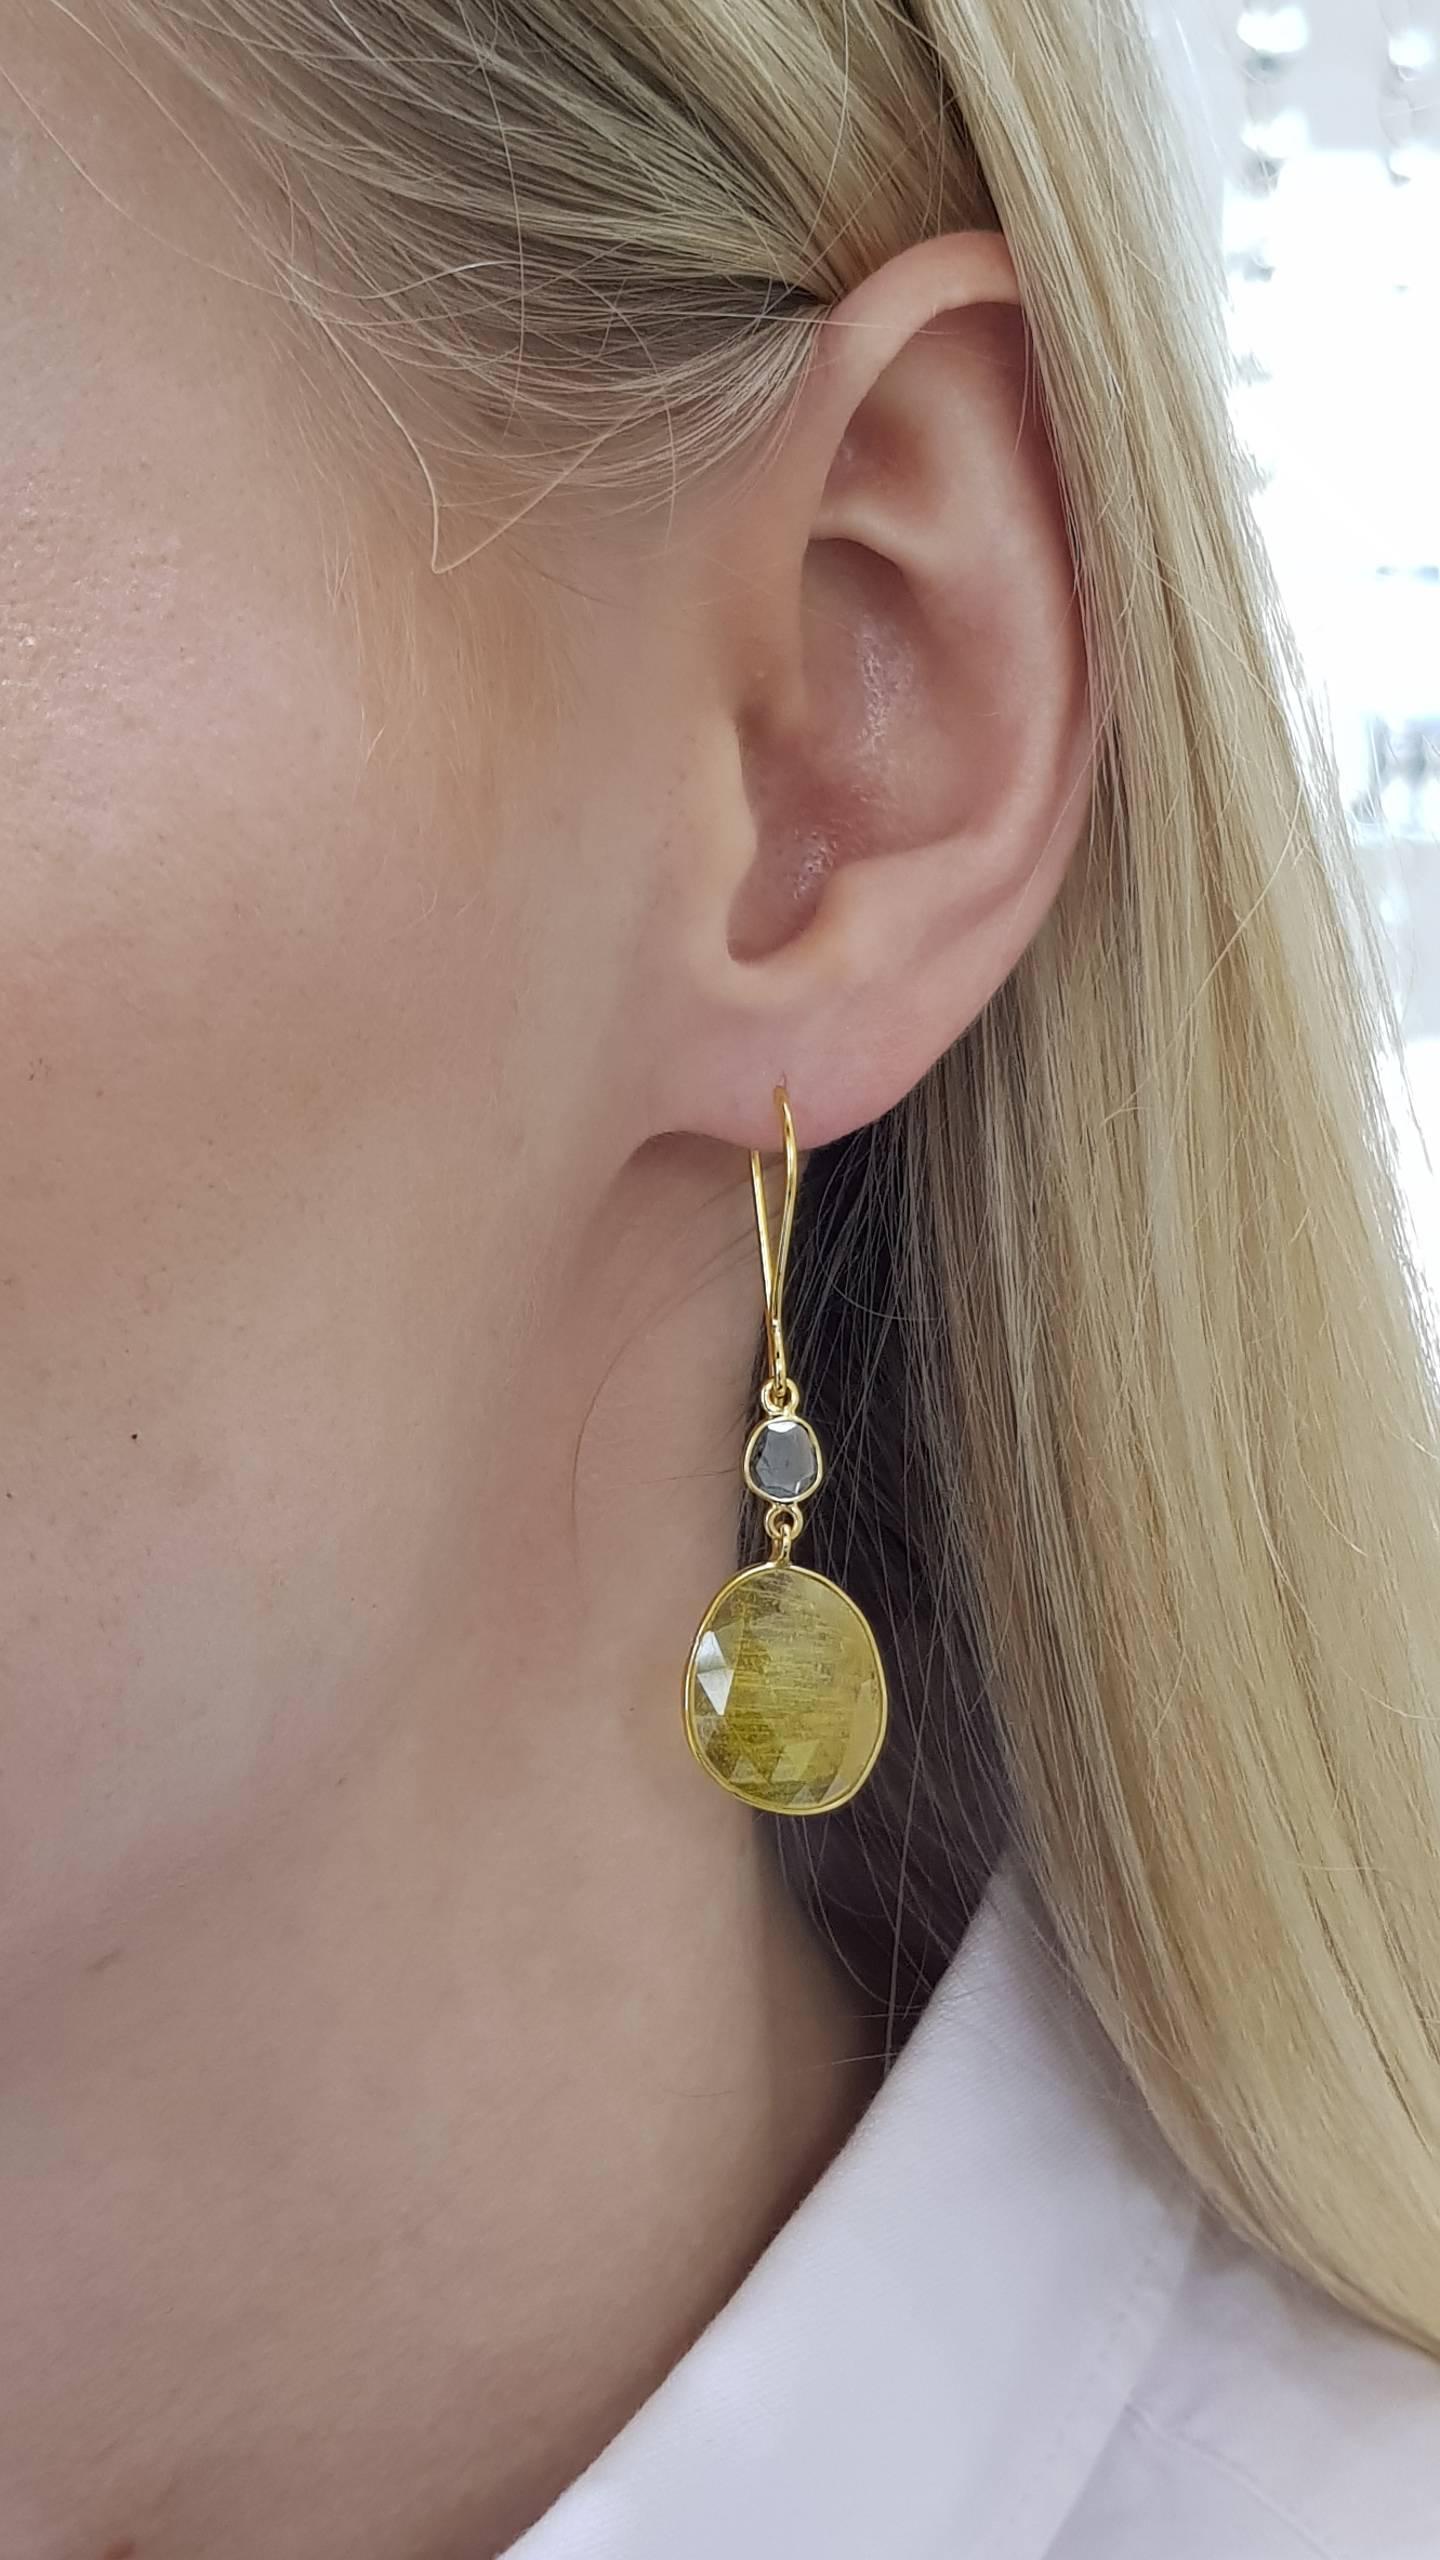 These Gorgeous 18.40 Carats Rose Cut Yellow Sapphire Earrings feature 0.32 Carat in two Diamond slices set in 18 Karat Yellow Gold. Each piece is hand made with a unique shaped precious stones. These elegant and lightweight earrings are perfect for